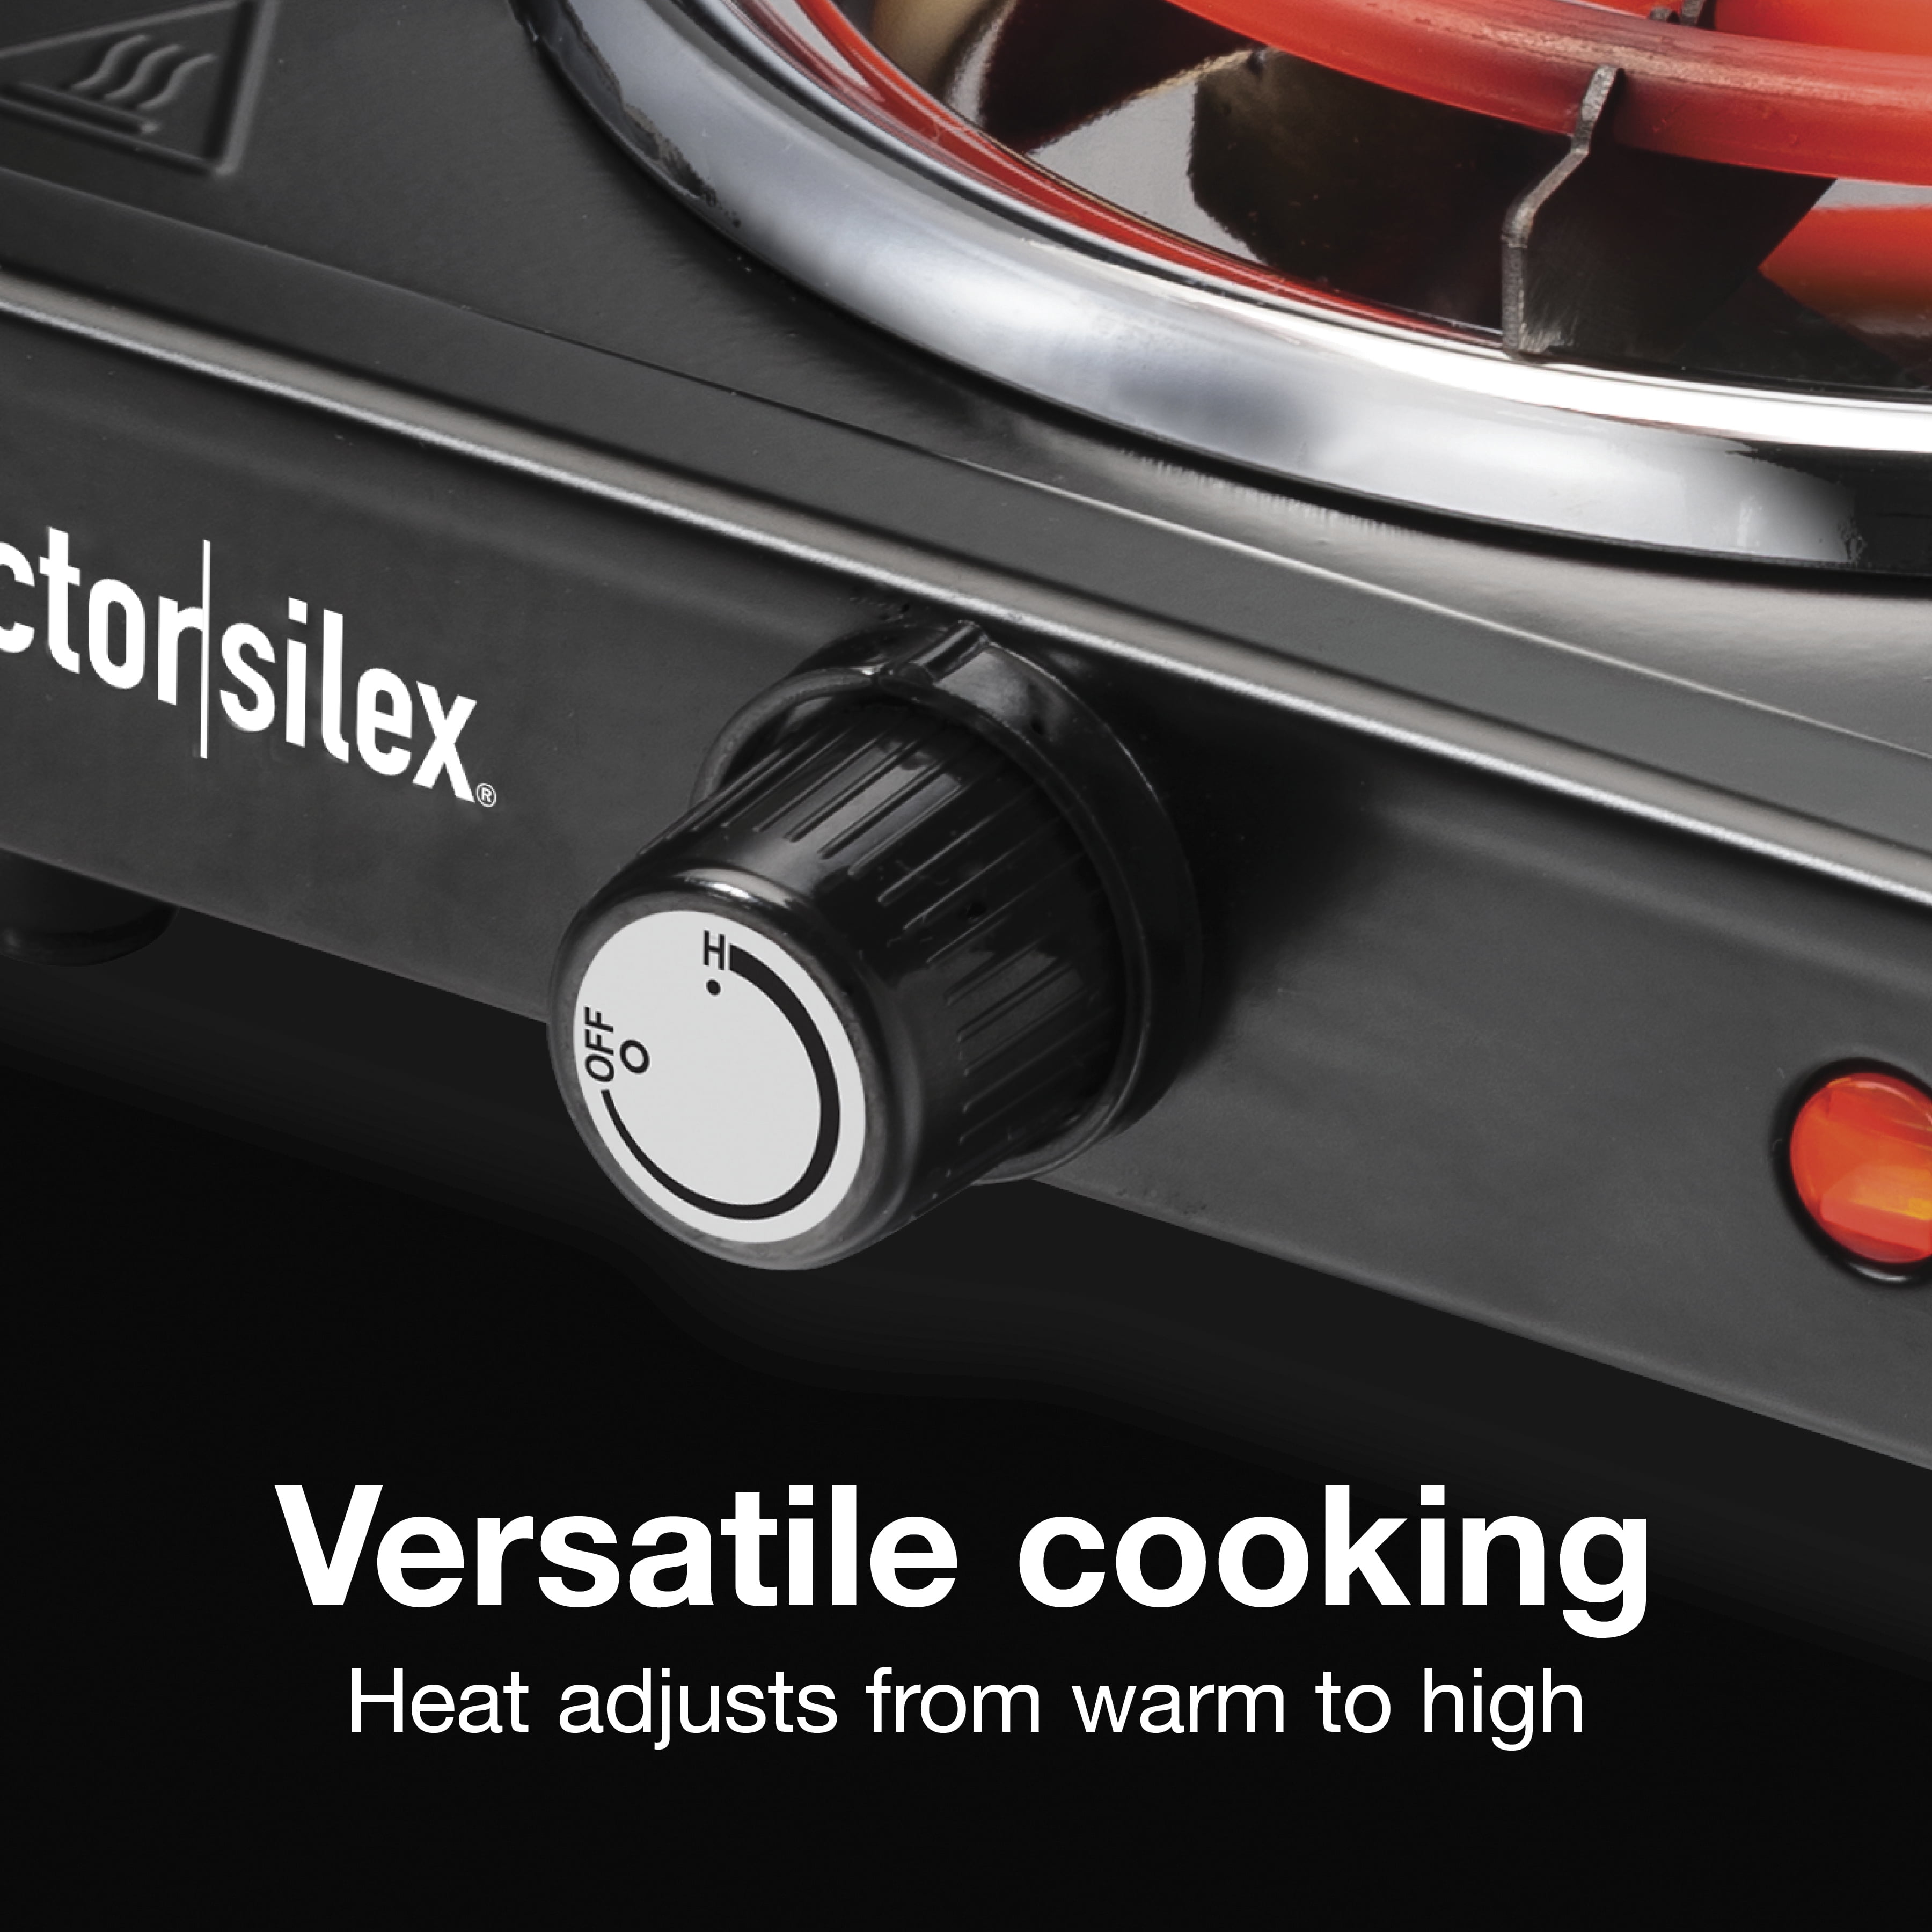 Proctor Silex Electric Stove, Single Burner Cooktop, Compact and Portable,  Adjustable Temperature Hot Plate, 1200 Watts, White & Stainless (34106)